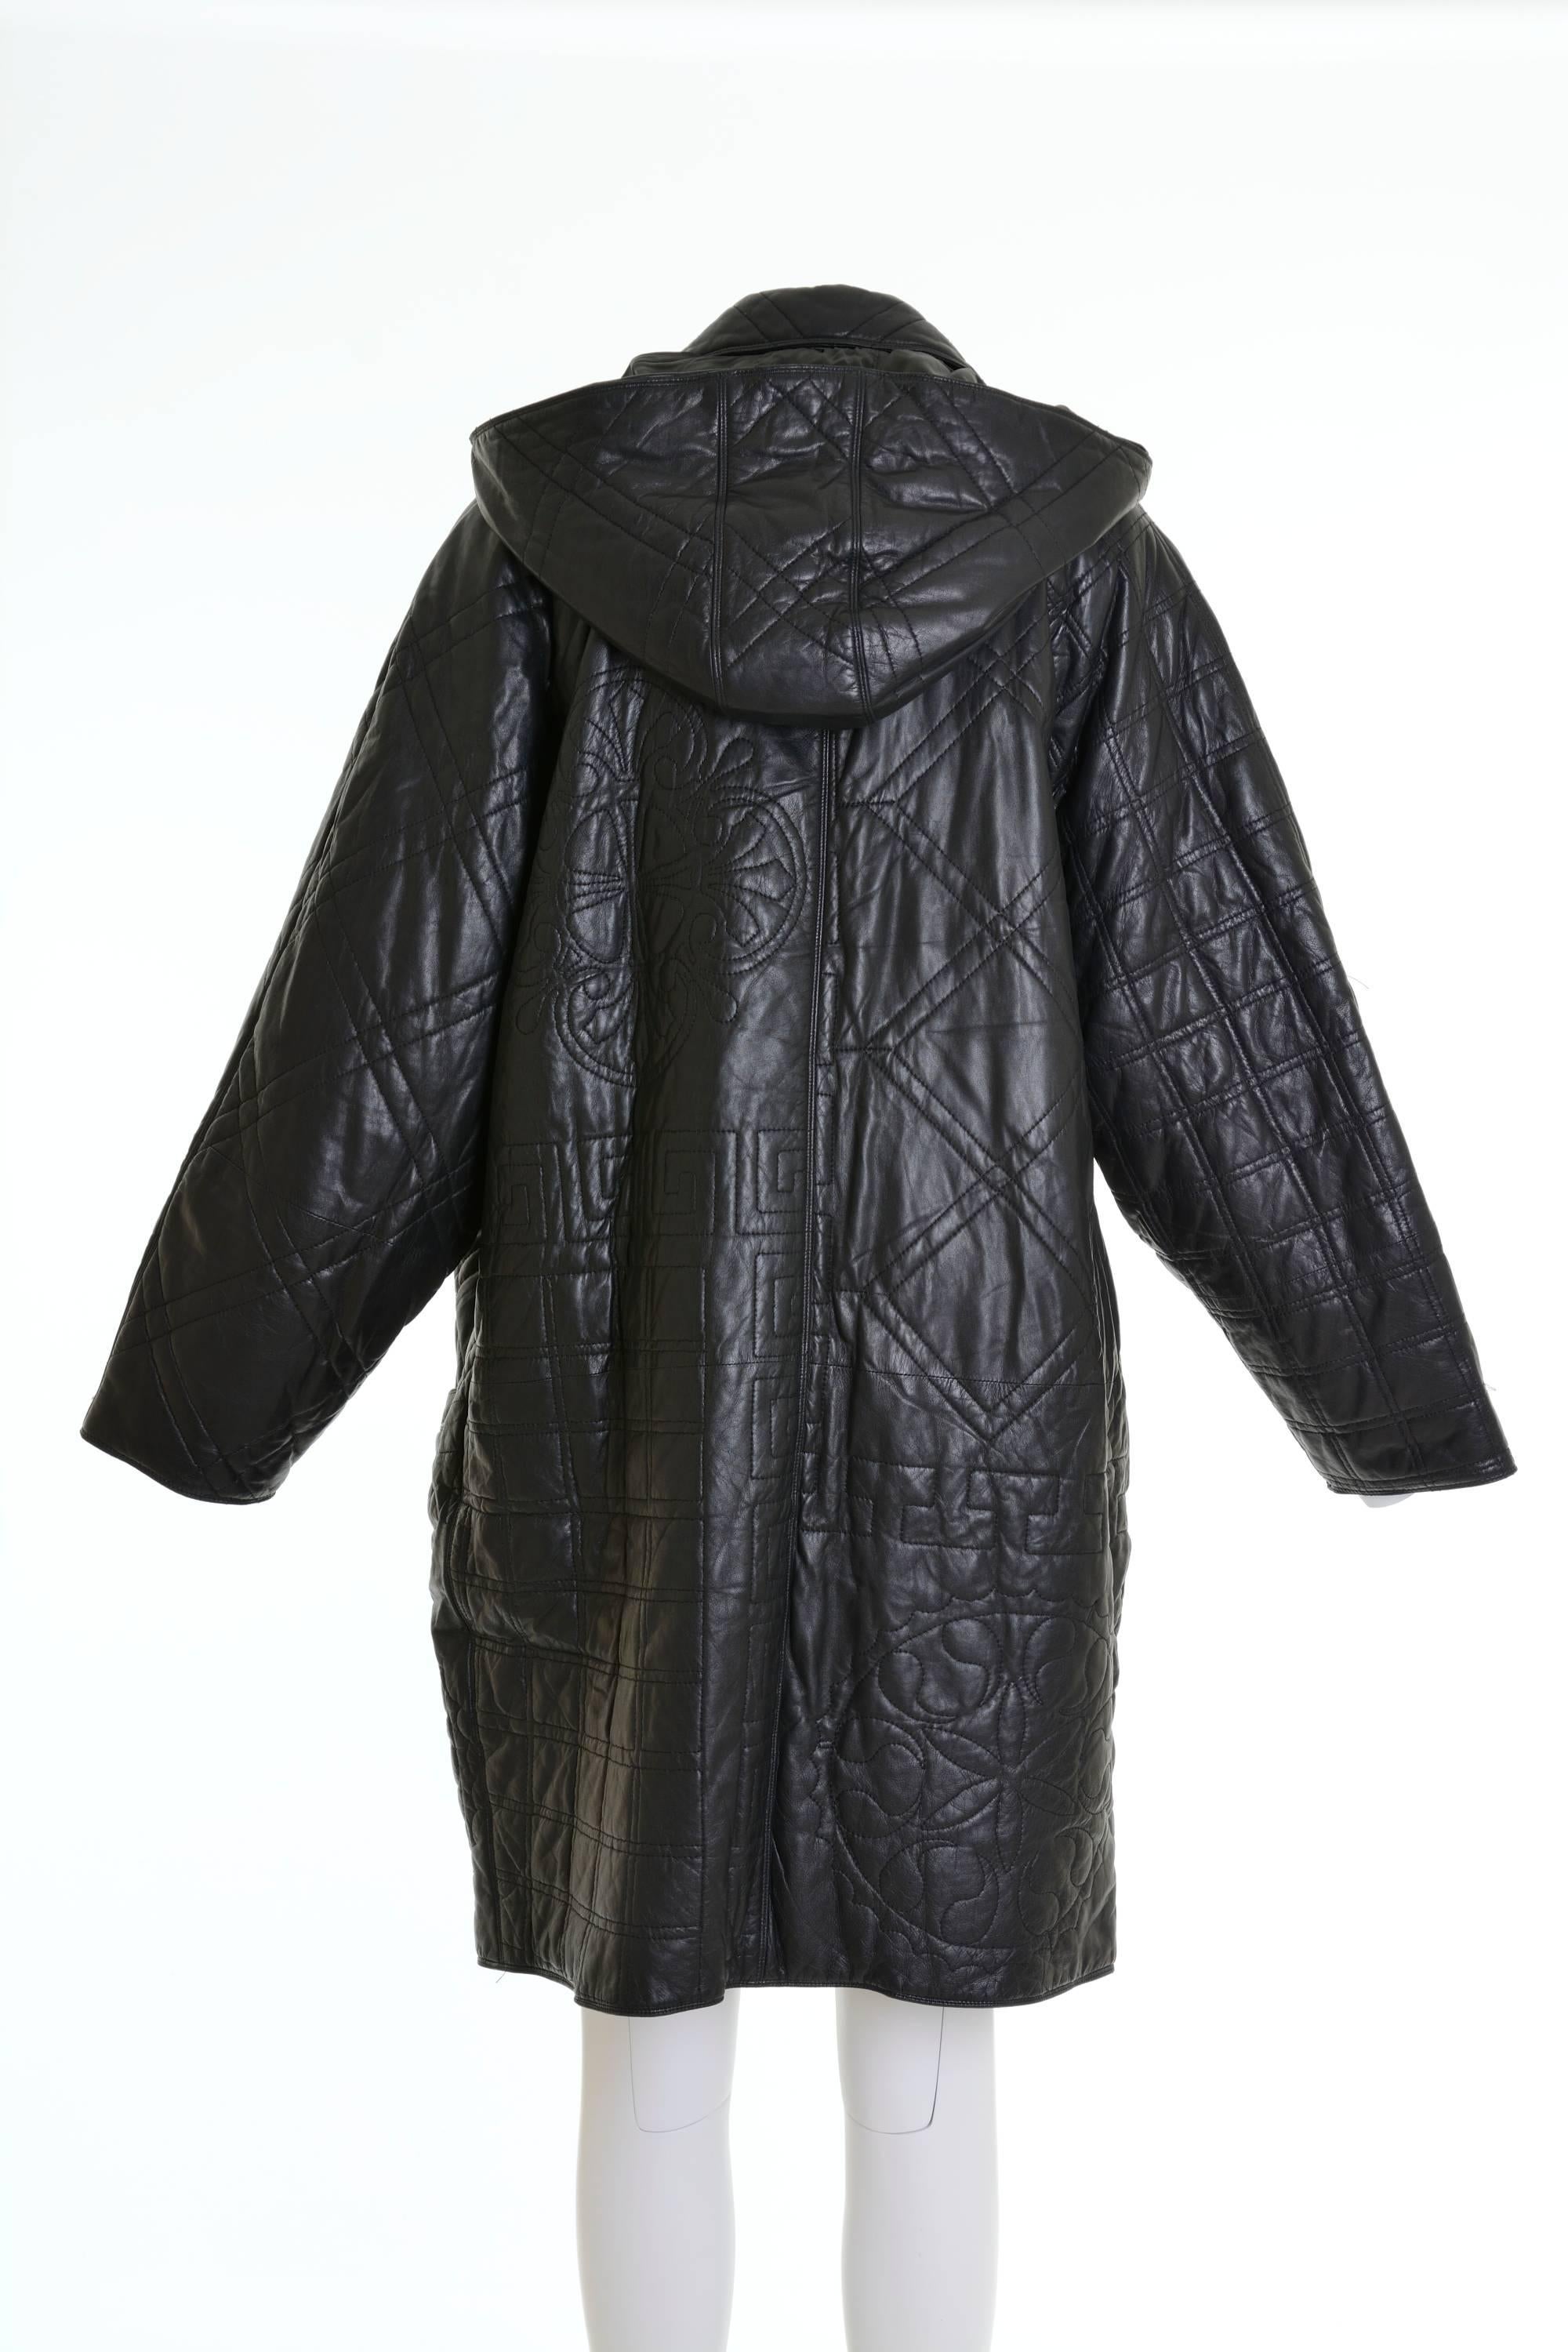 1980s Gianni Versace long jacket in leather fabric. Abstract top stitches, removable hood, toggle and zip closure, patch pockets, fully lined, inside pocket.

Excellent Vintage Condition

Measurements:
Estimated size: Oversize
Shoulders 24 in
Bust